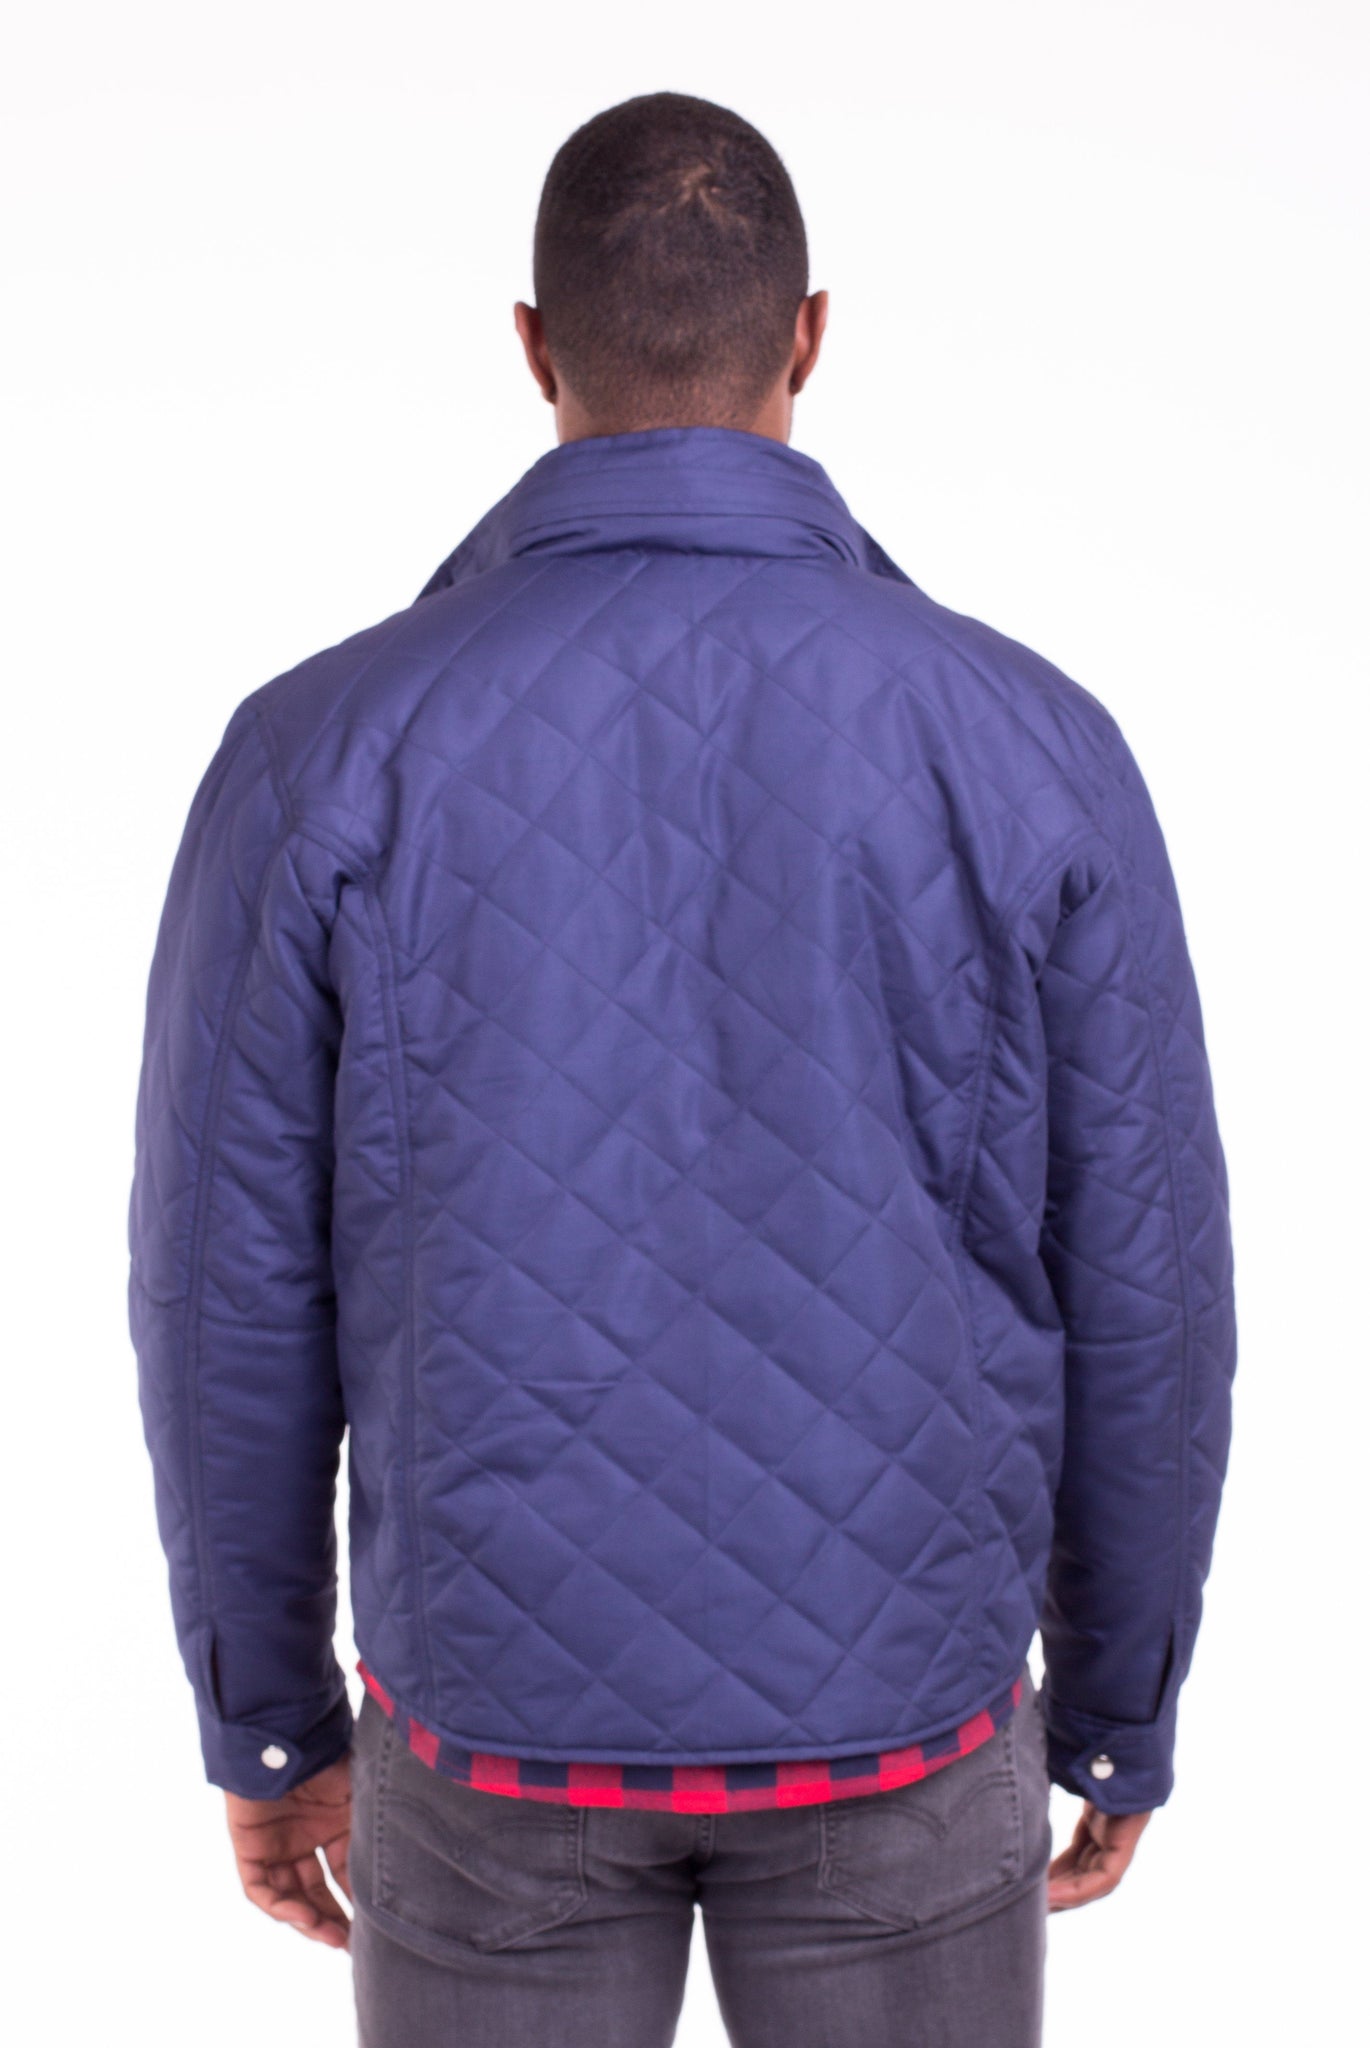 ENZO QUILTED JACKET | Poor Little Rich Boy Clothing